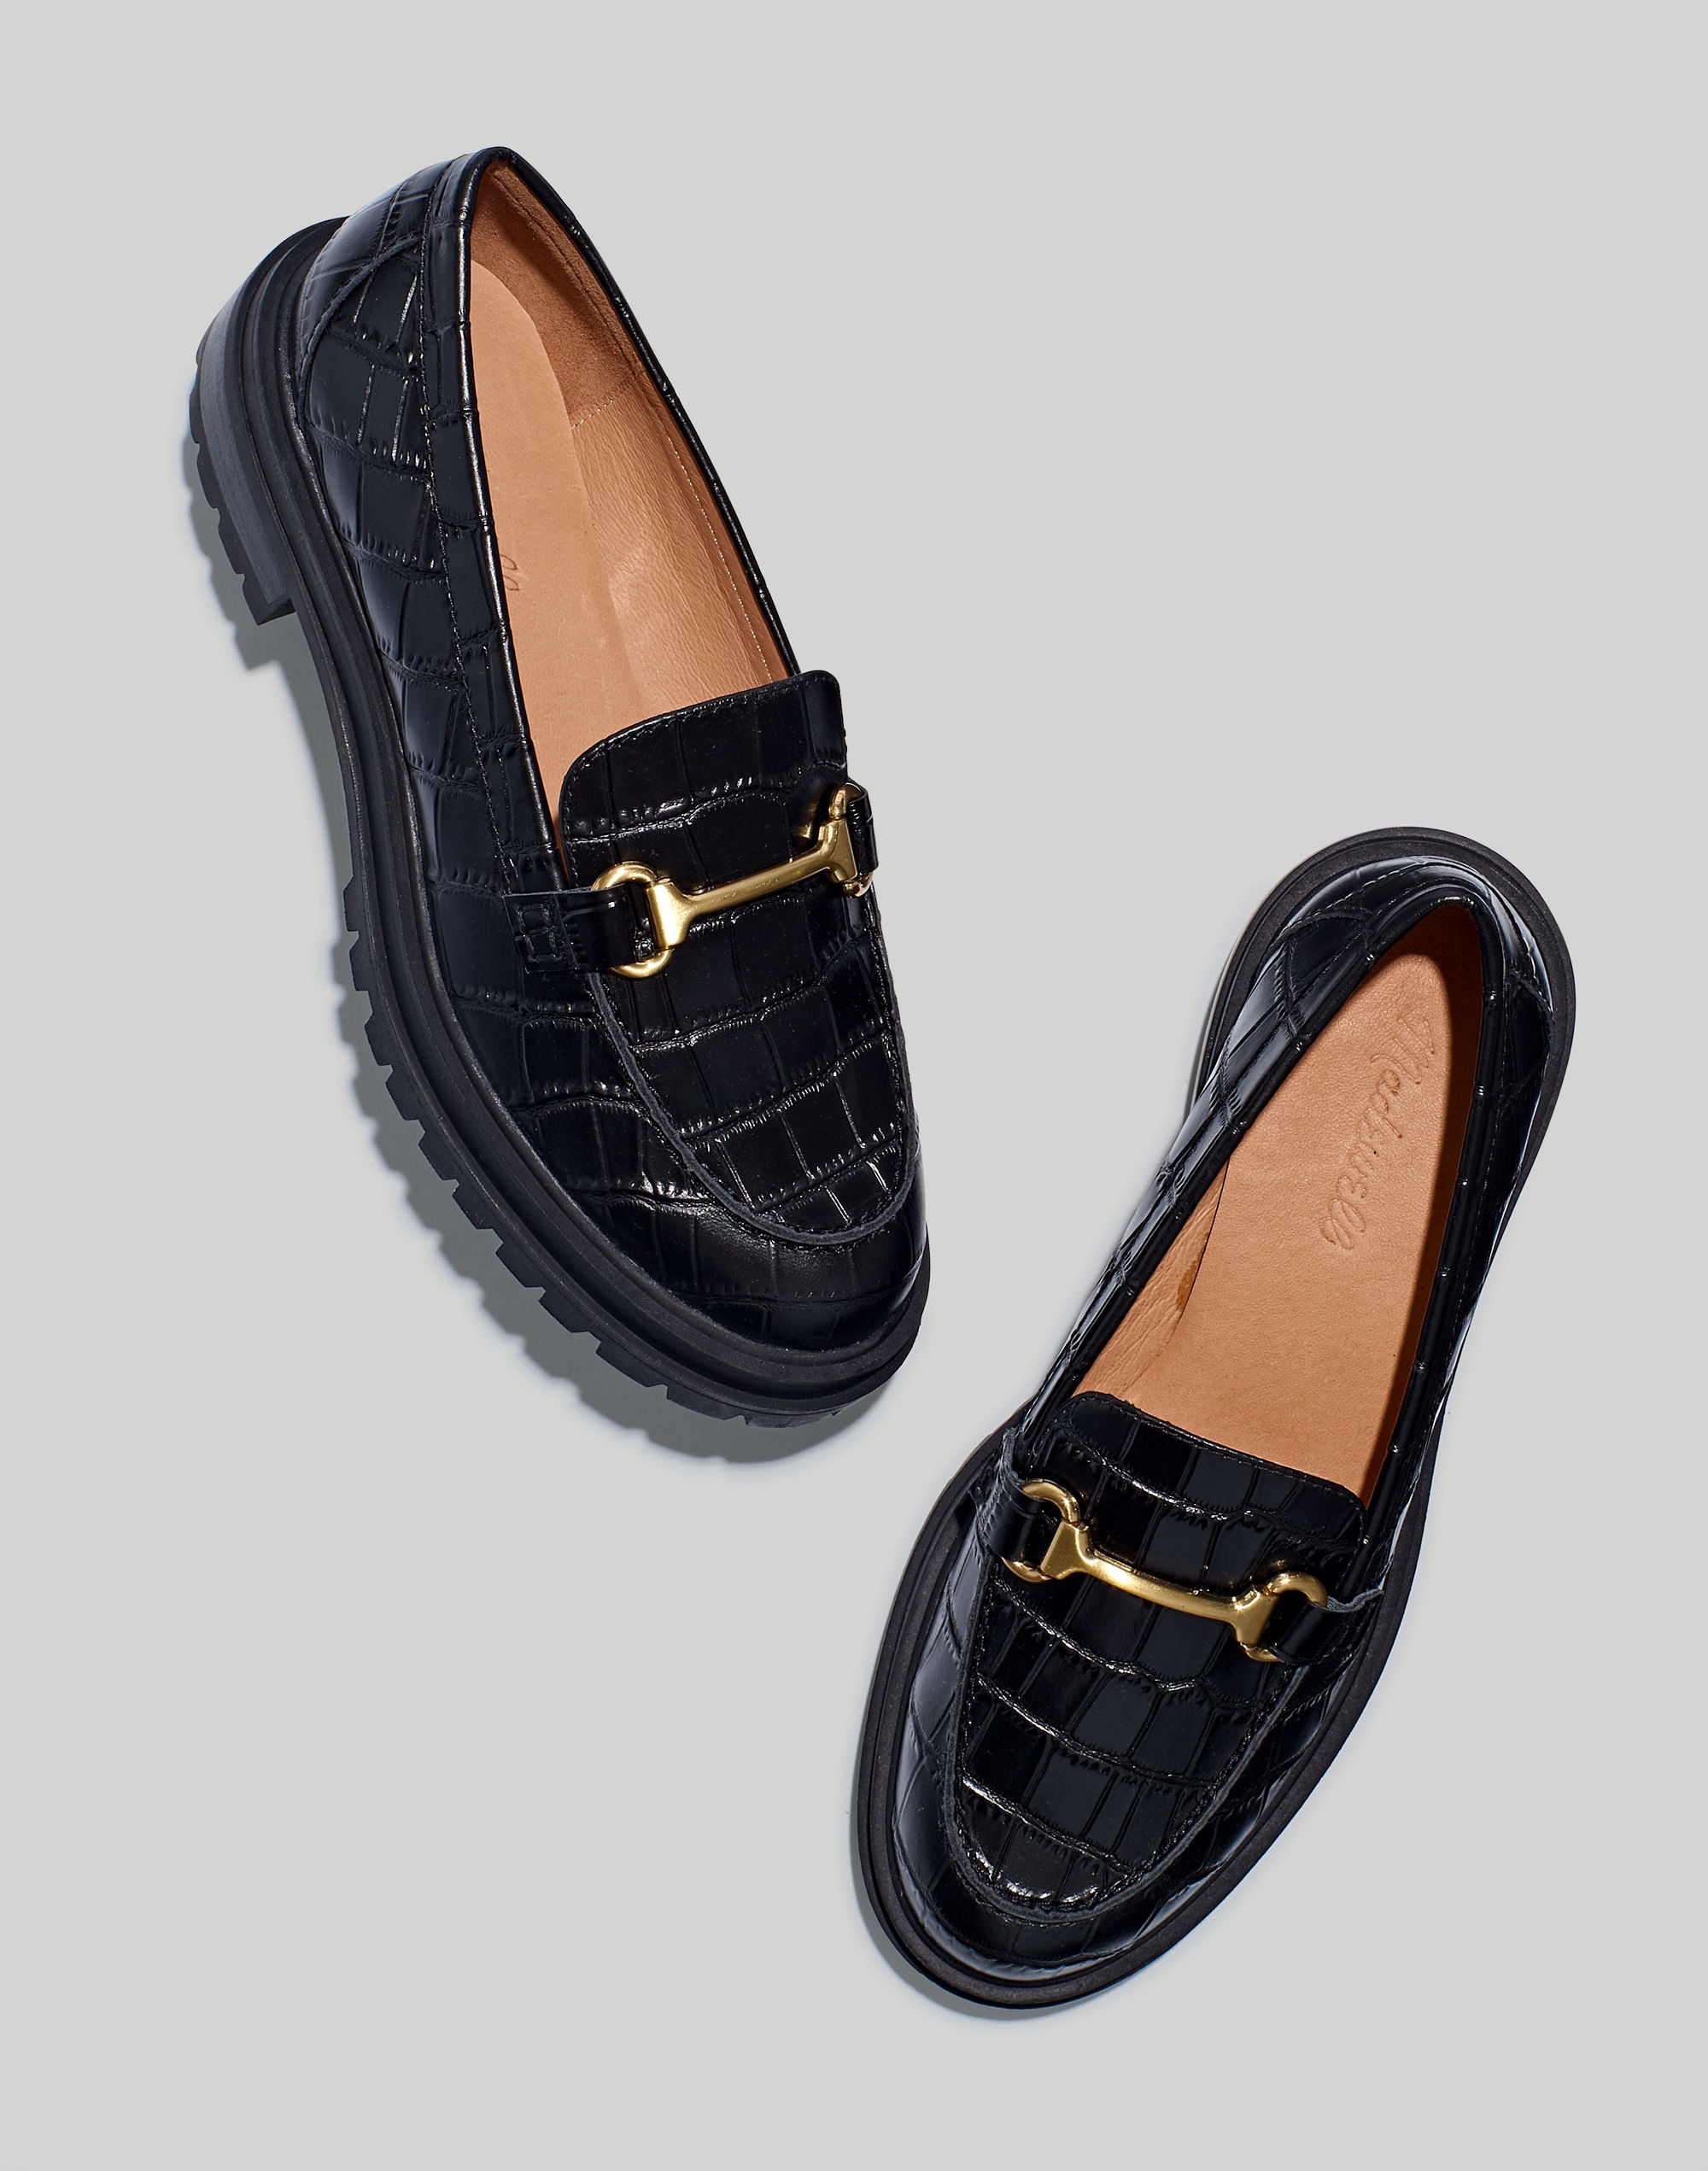 The Bradley Hardware Lugsole Loafer in Croc Embossed Leather